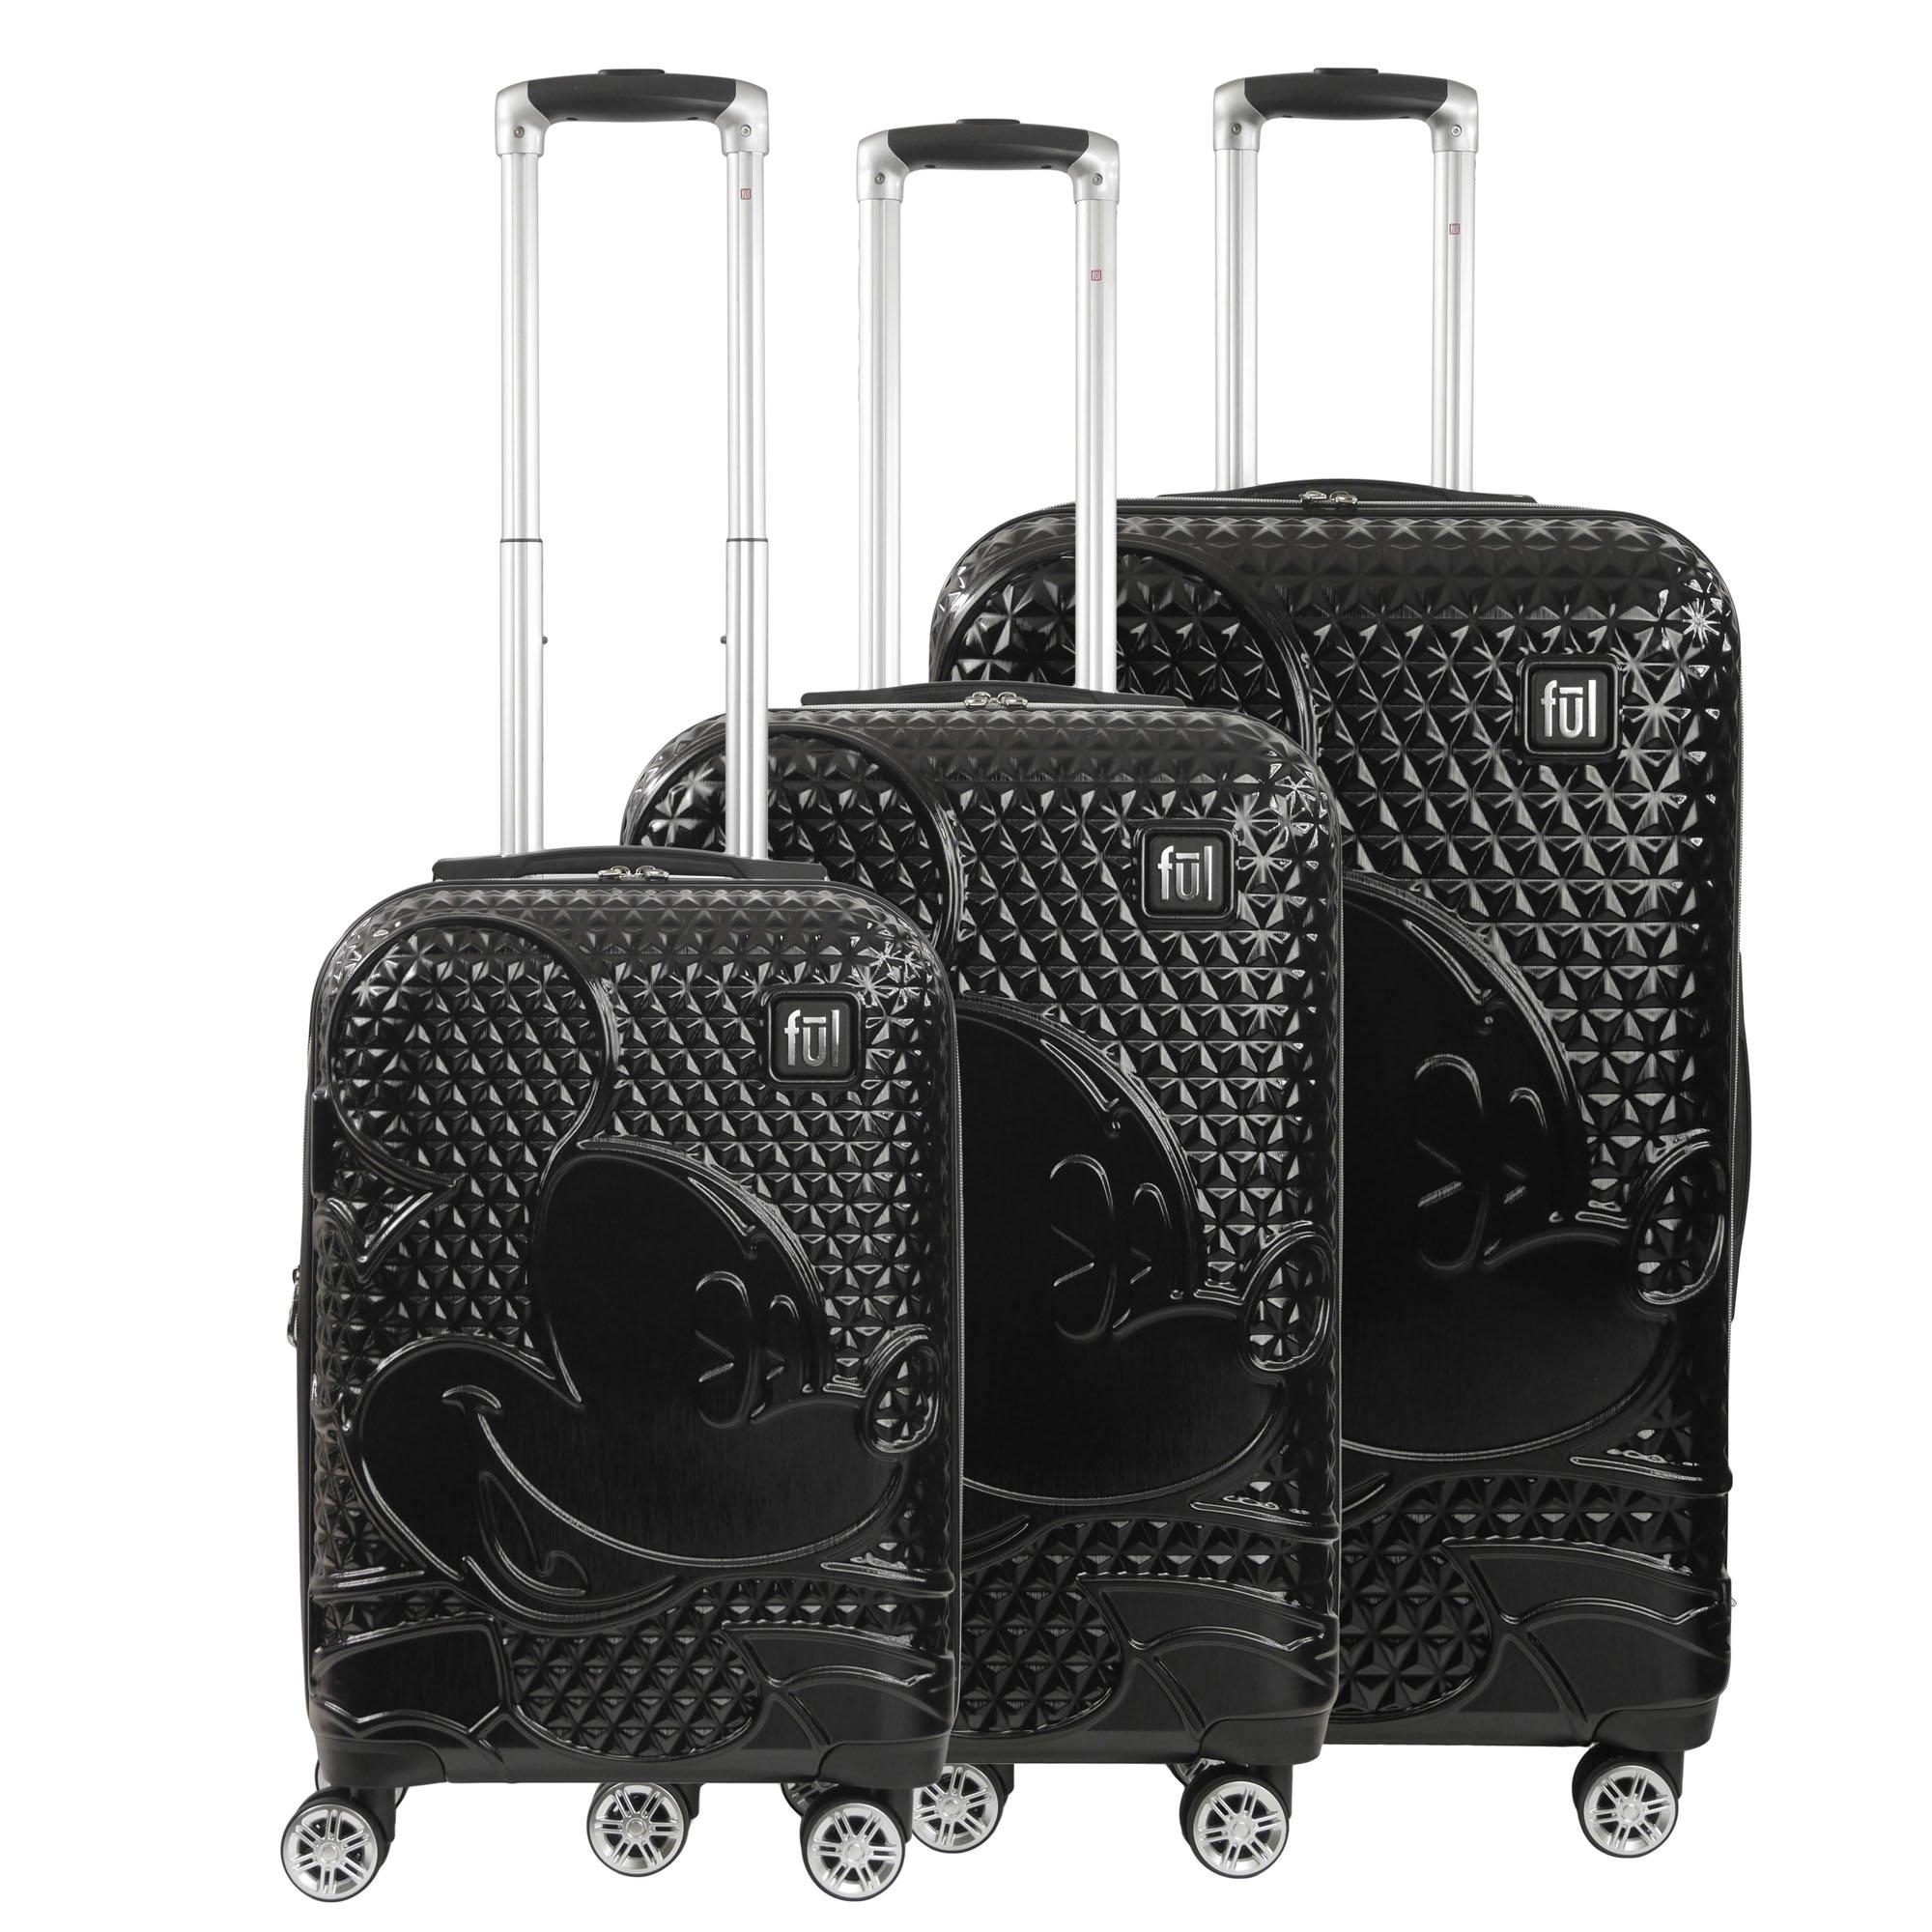 FUL Disney Textured Mickey Mouse Hard Sided Luggage 3-Piece Set